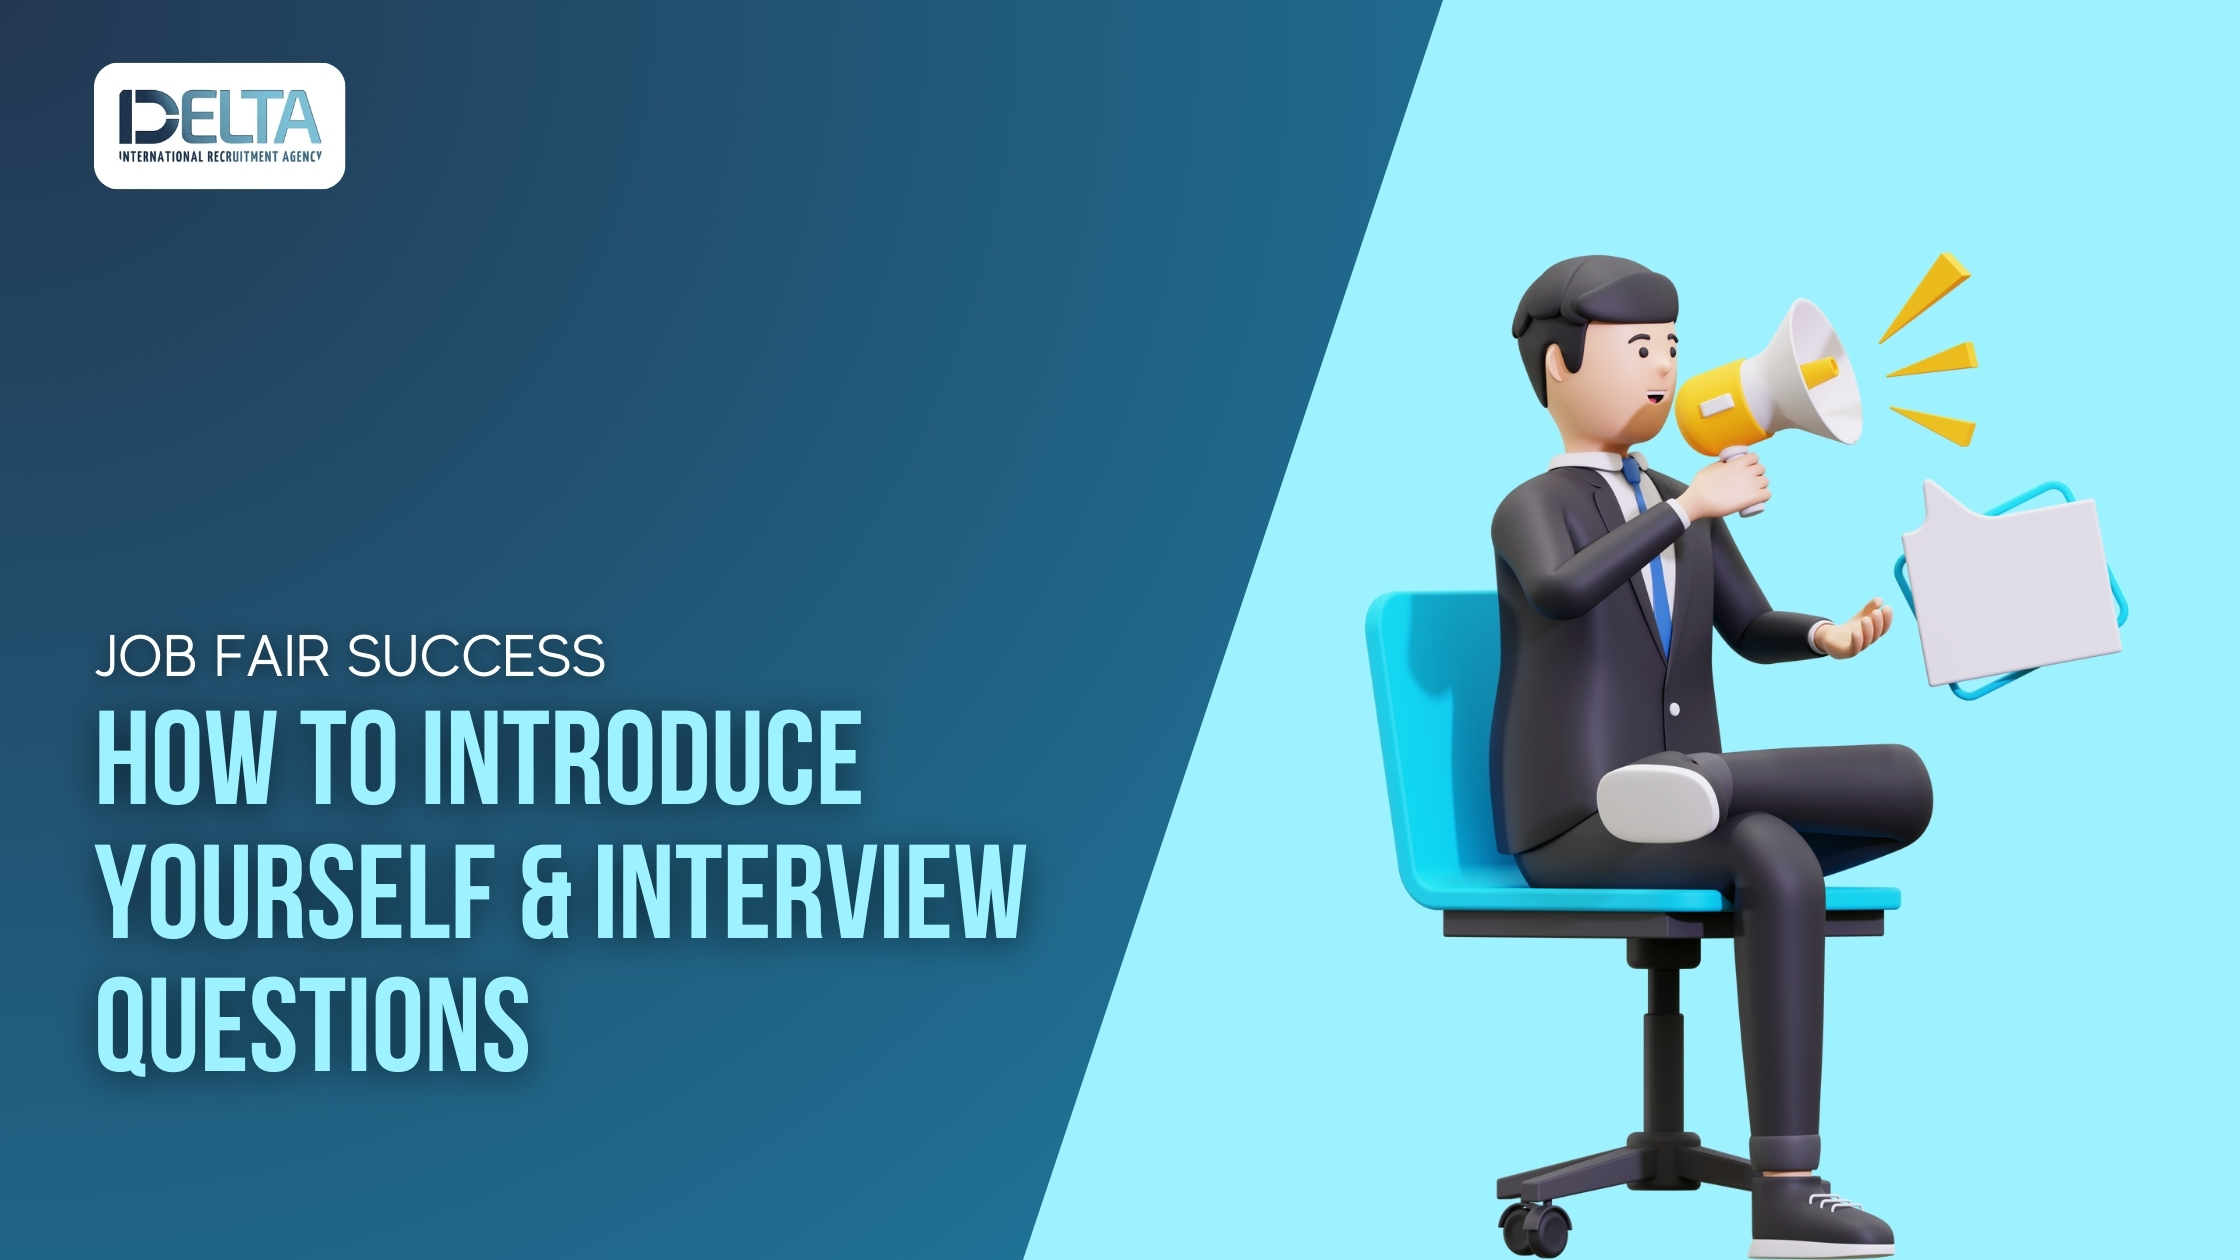 Job Fair Success: How to Introduce Yourself & Interview Questions